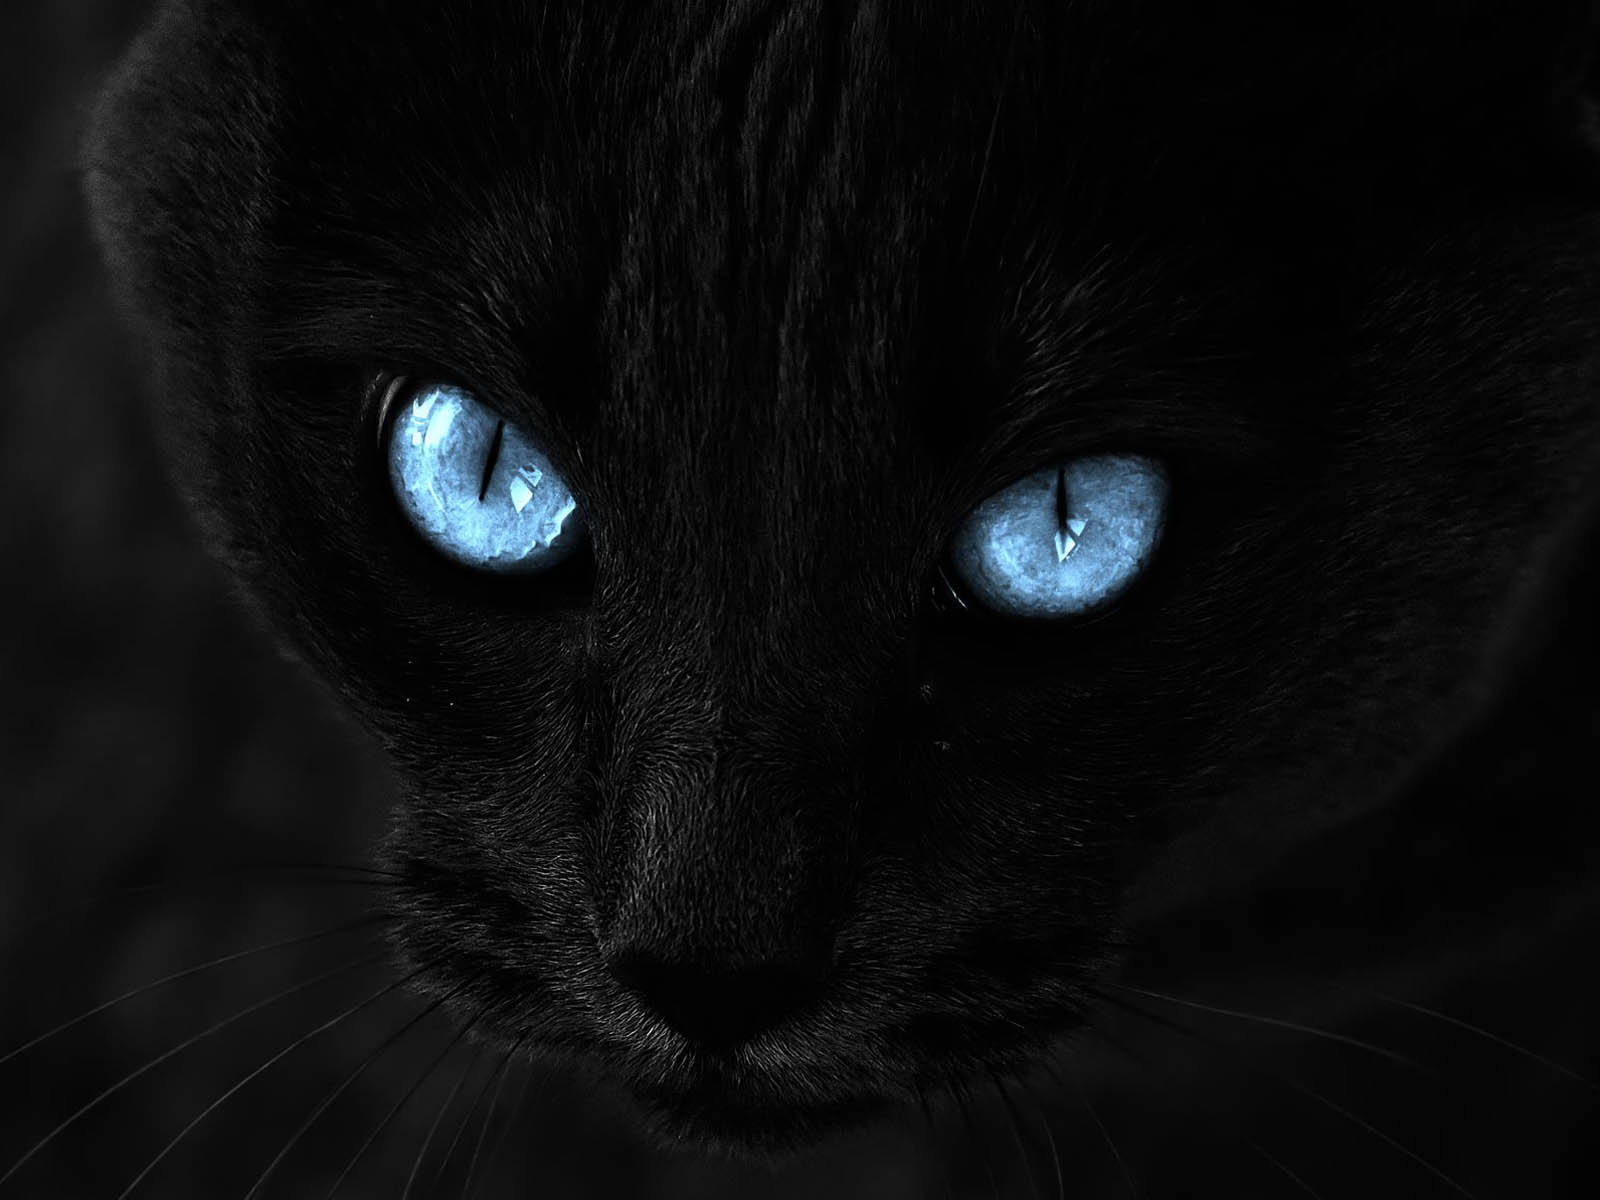 black cat with blue eyes breed